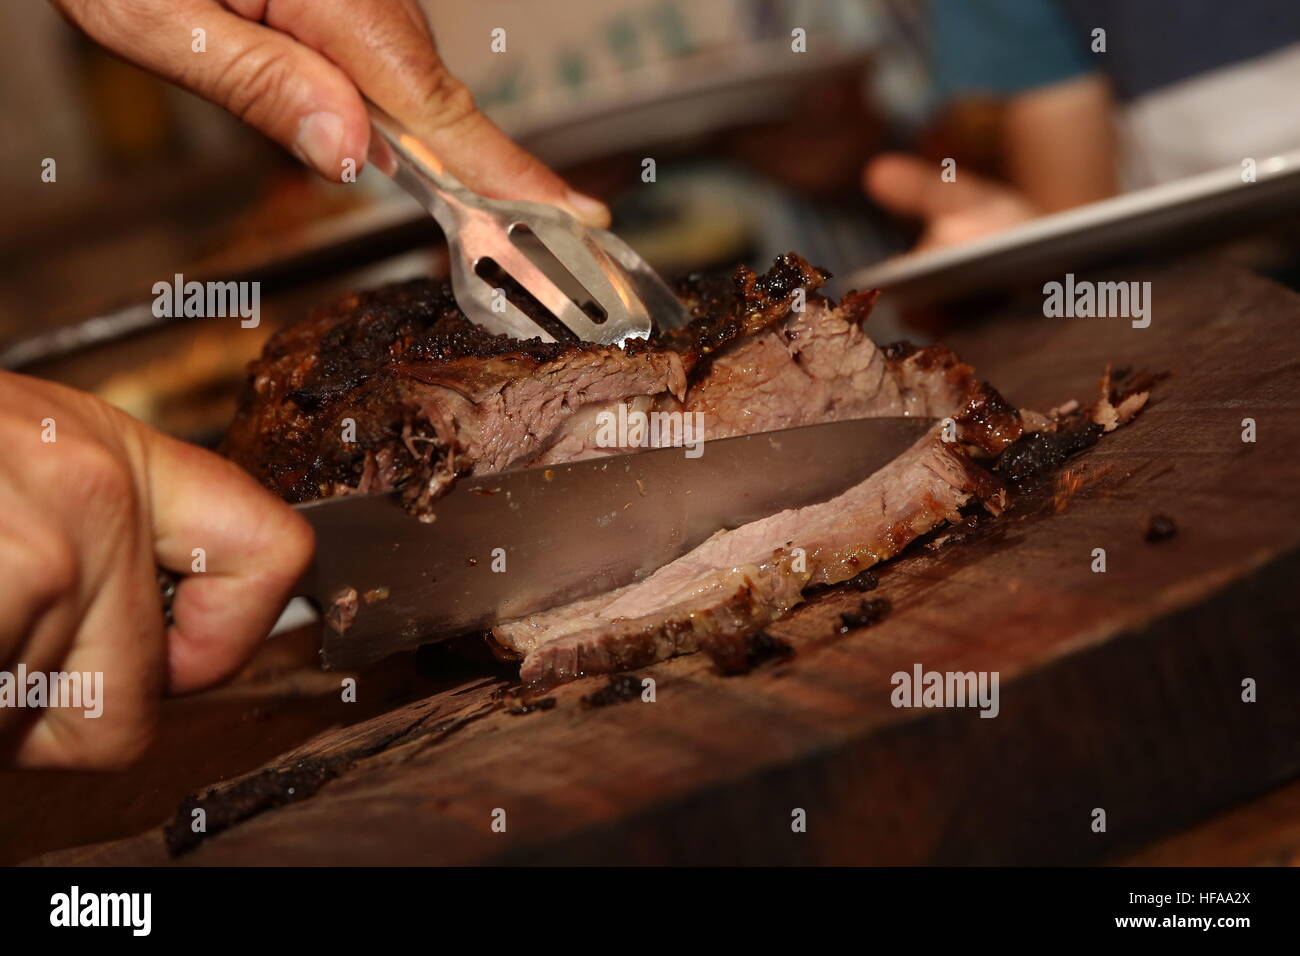 Cutting slices of Roast Beef at a buffet table Stock Photo